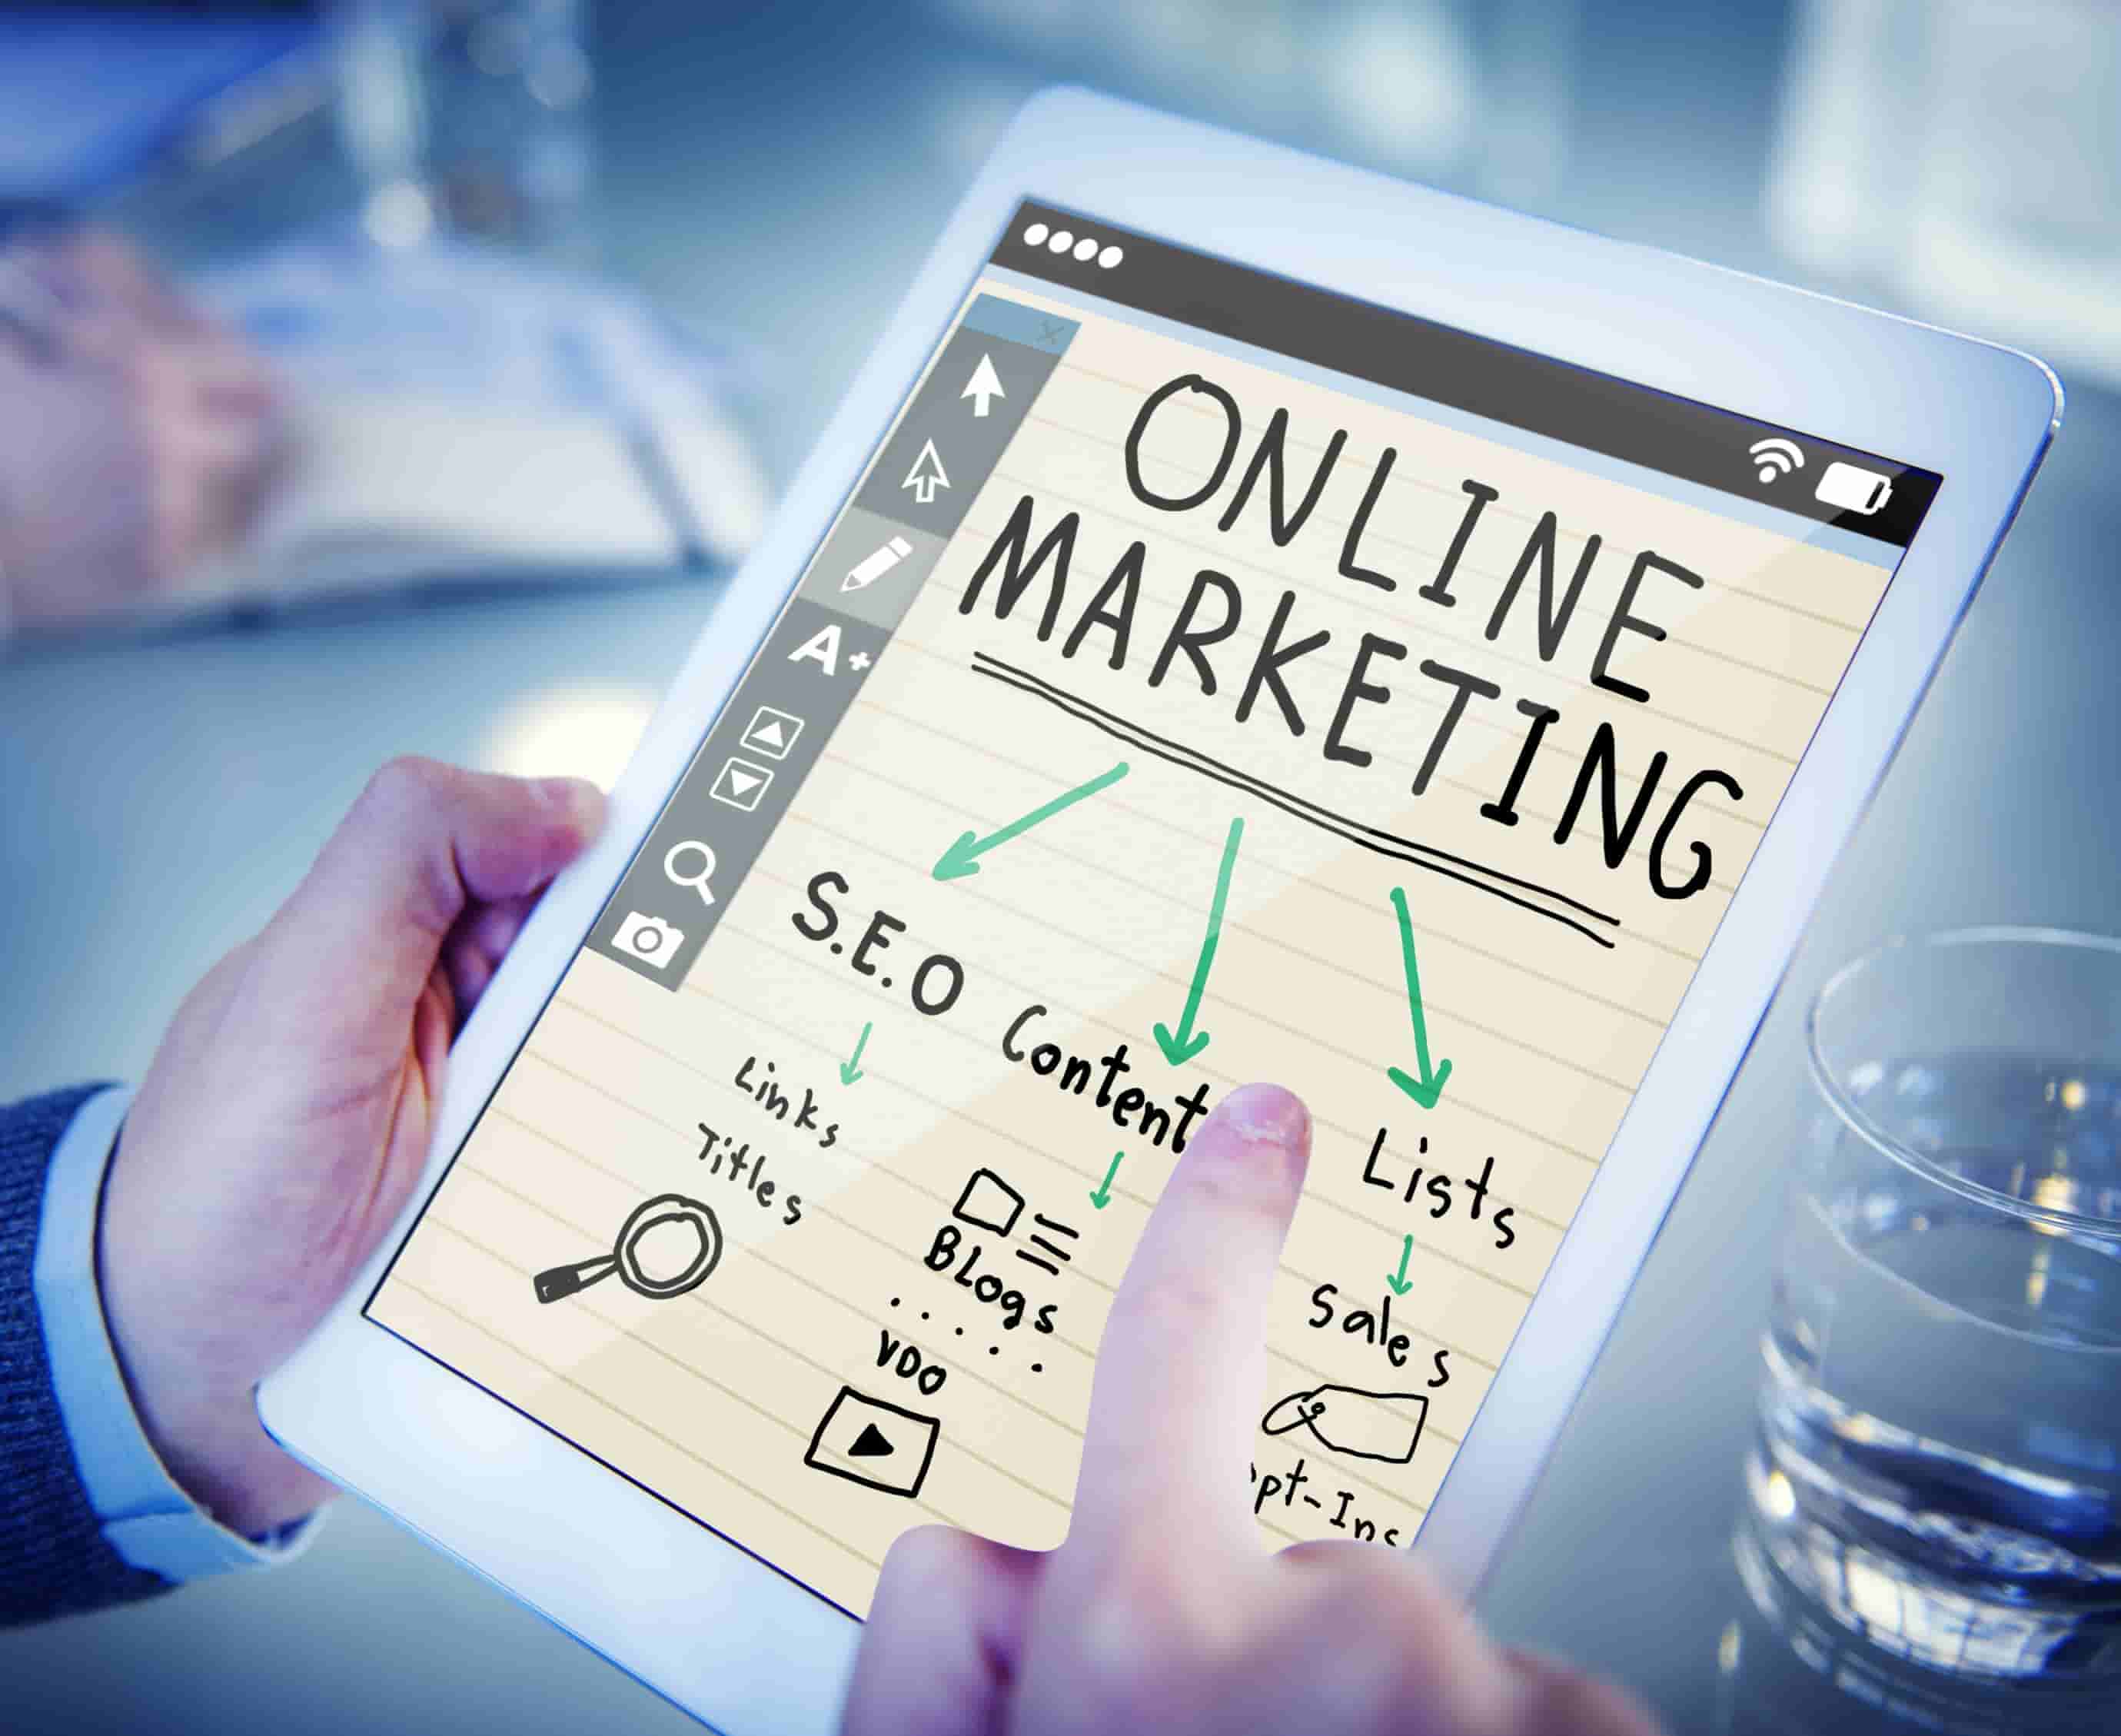 Marketing Your Business Online - Measuring Success And Analytics Insights